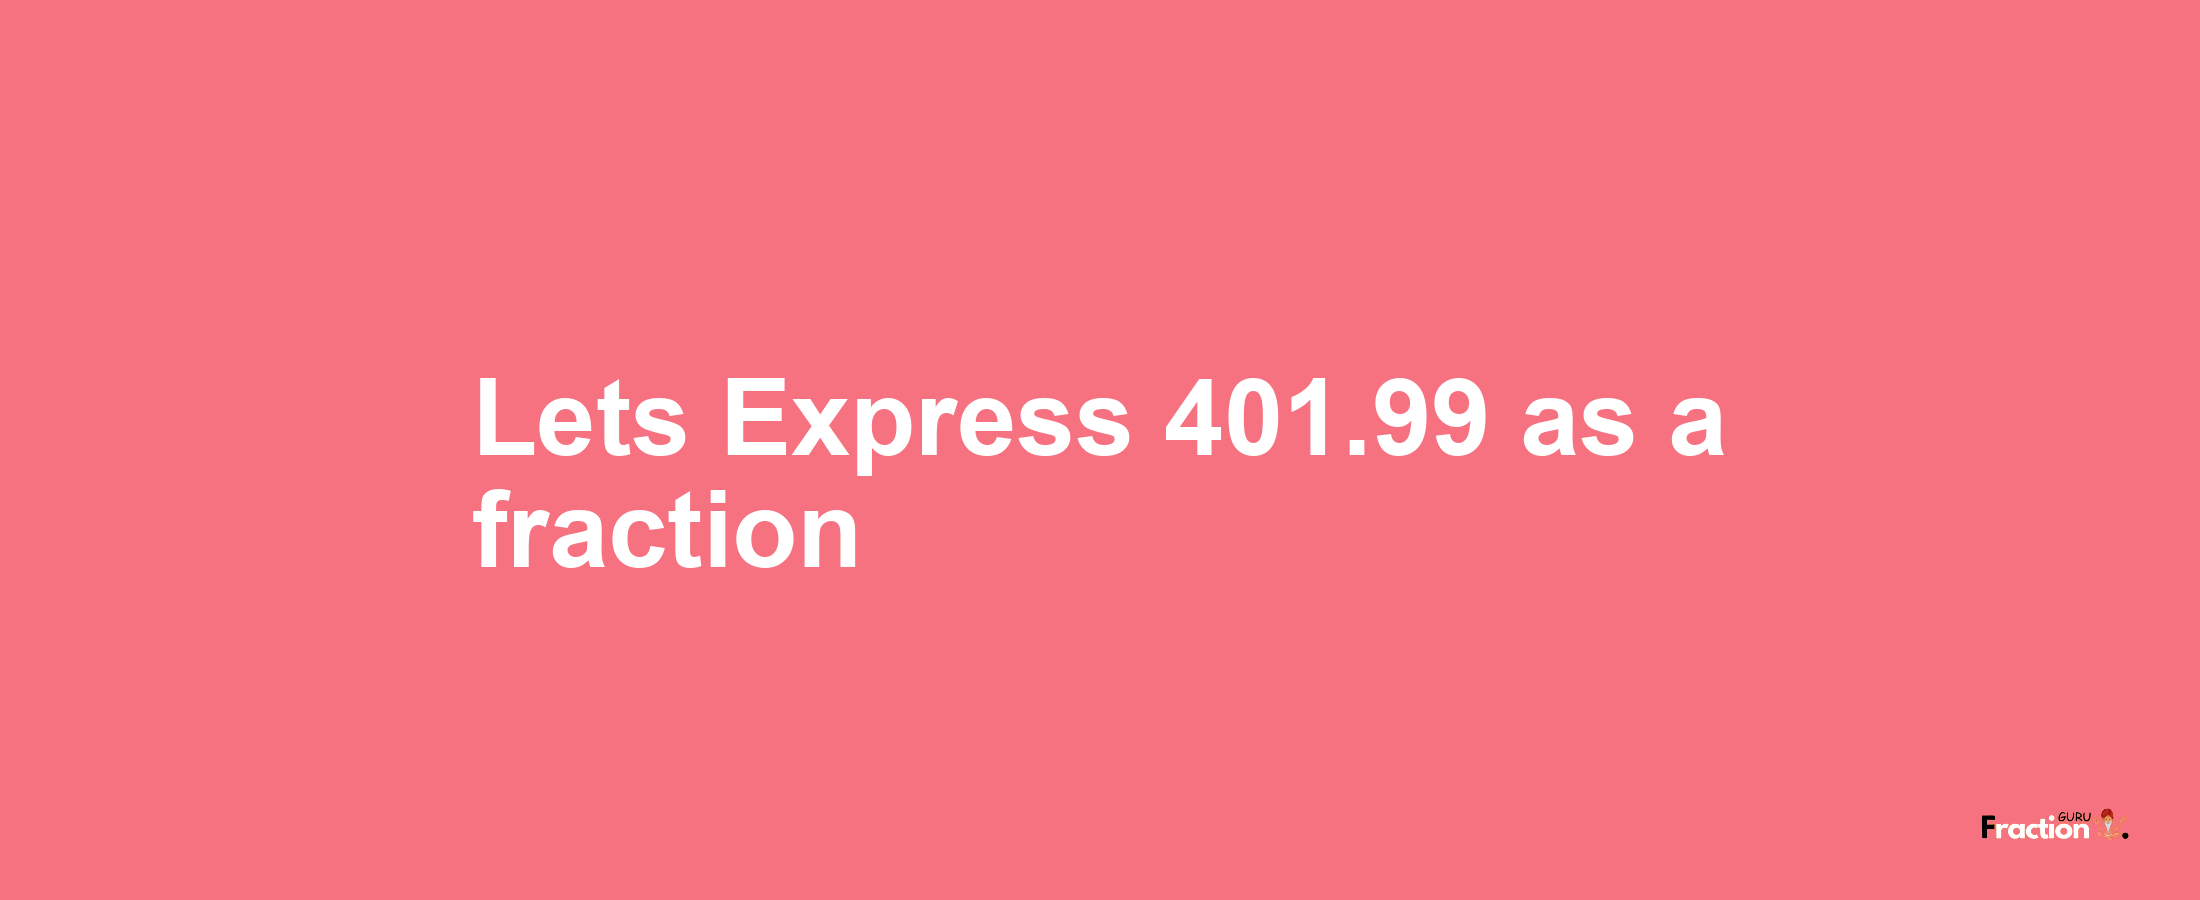 Lets Express 401.99 as afraction